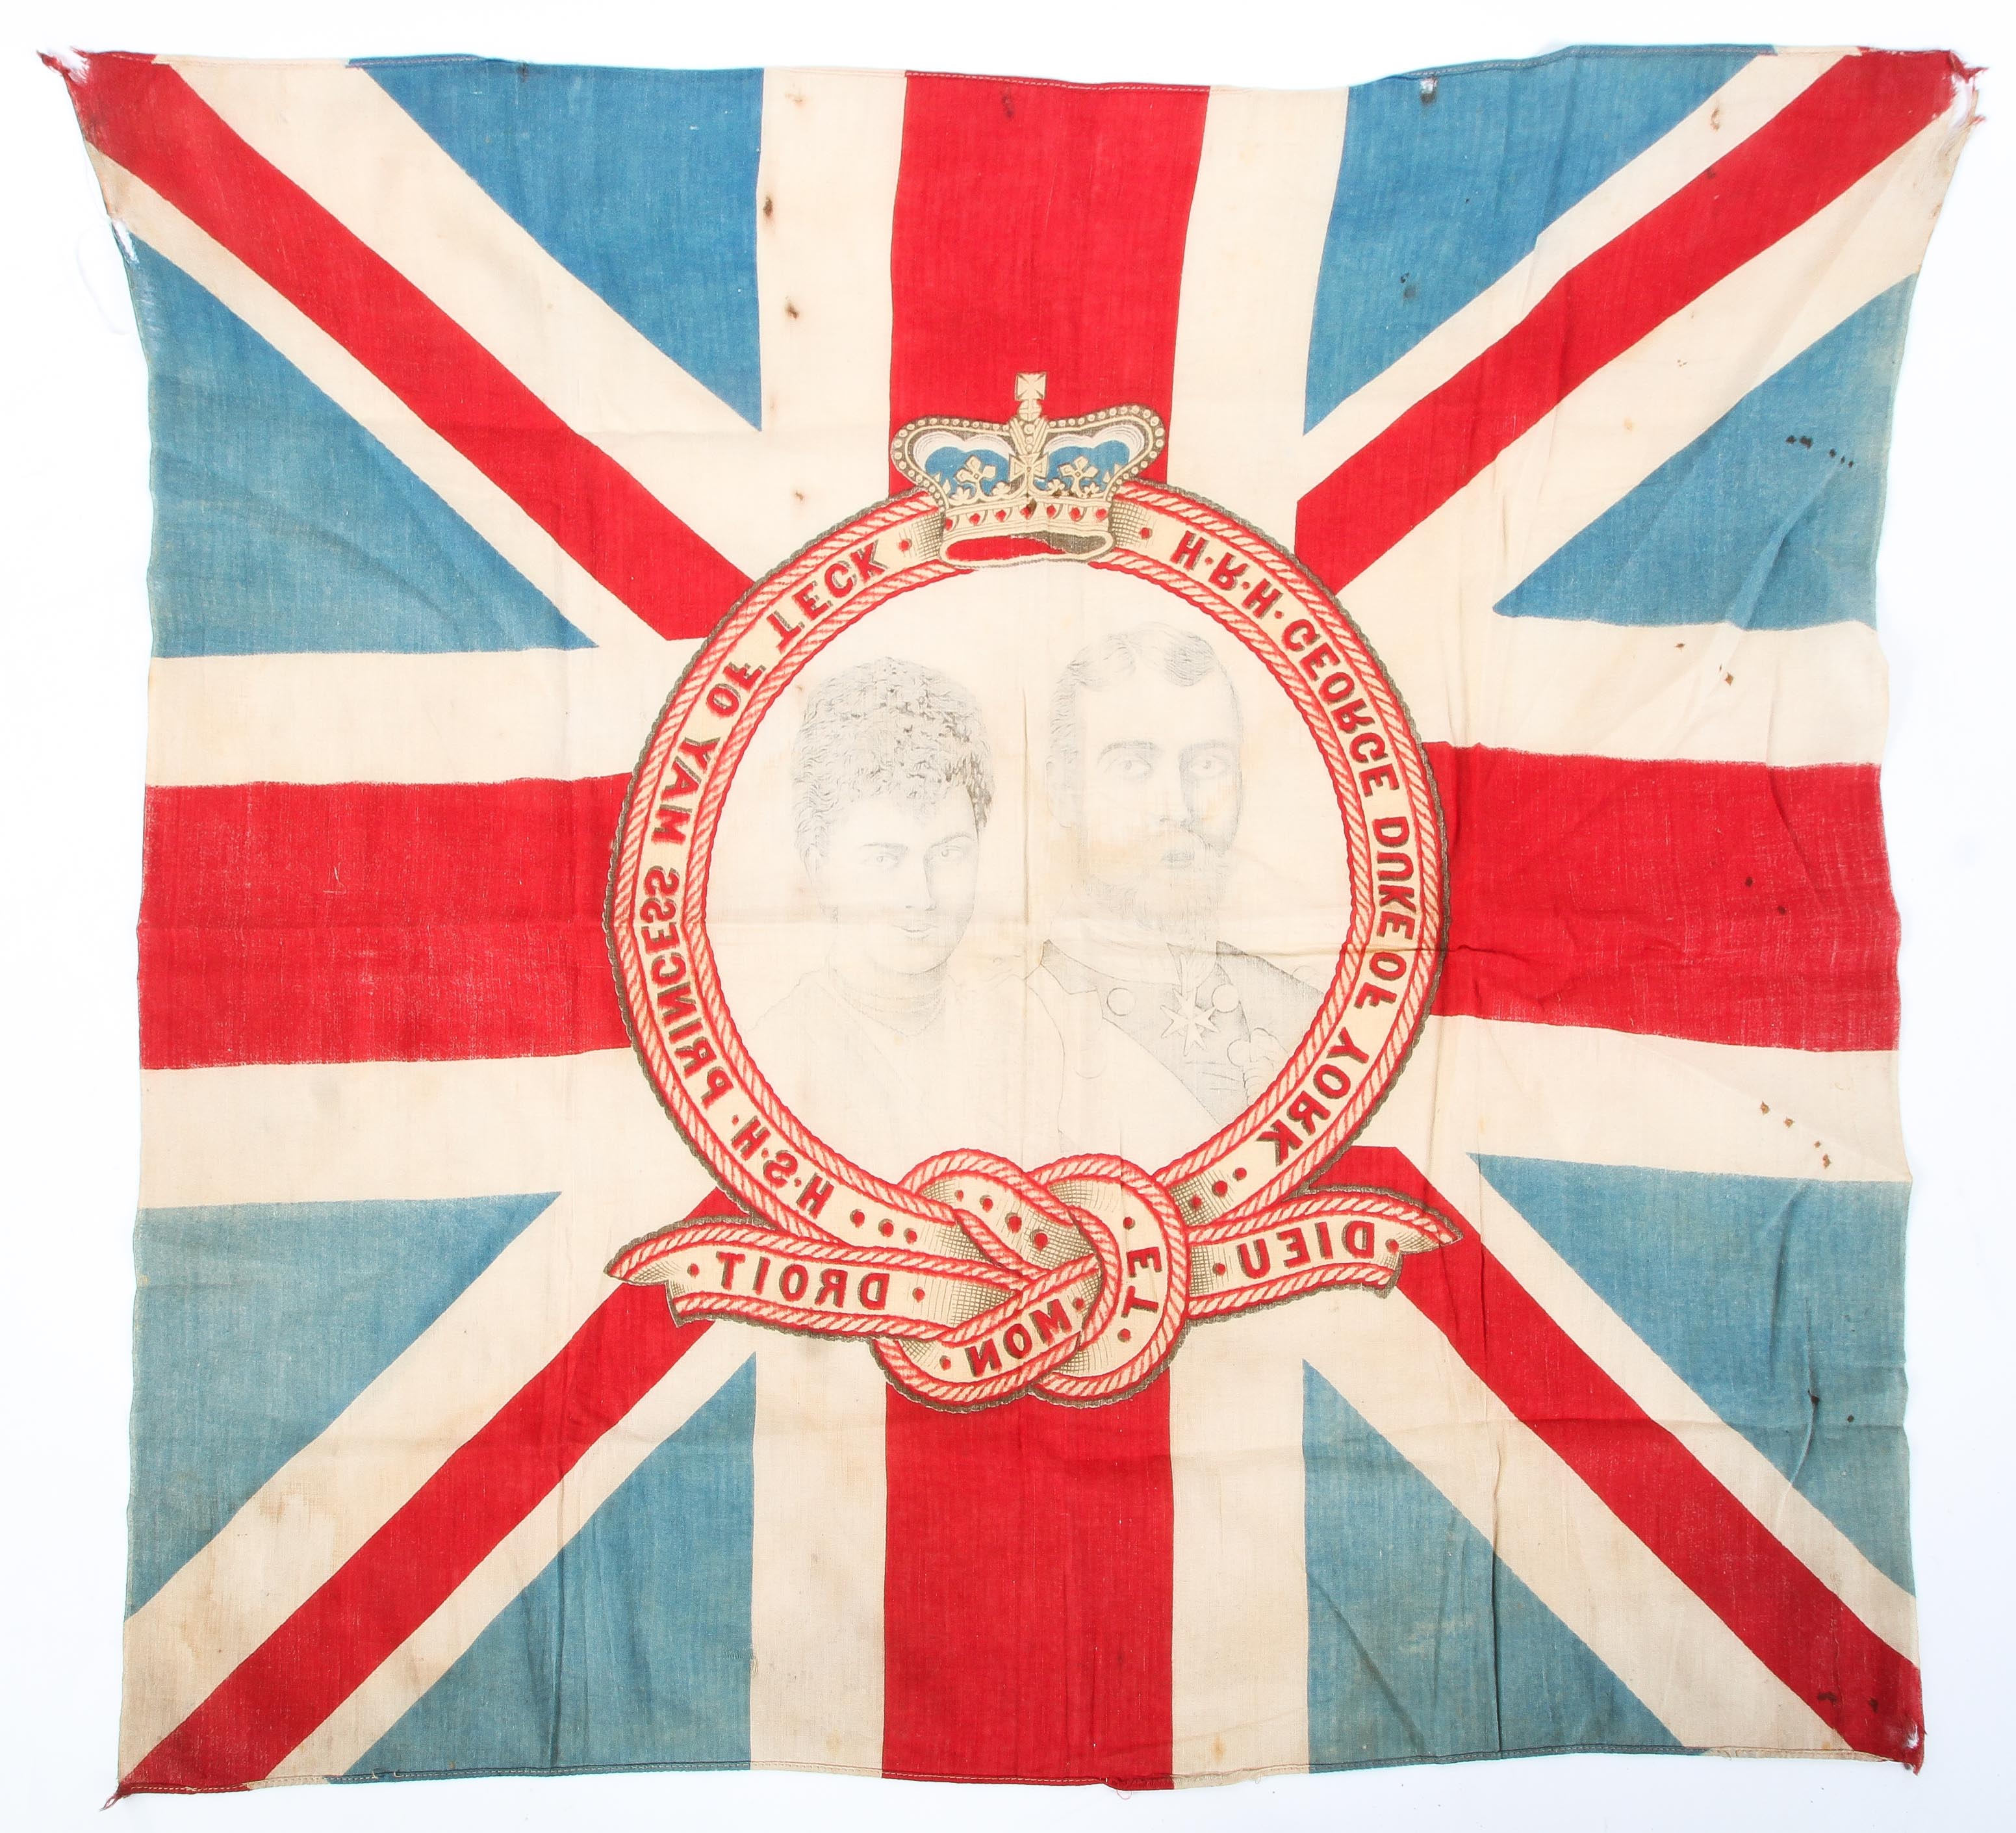 An antique commemorative flag. The central cartouche printed with the words 'H.R.H.